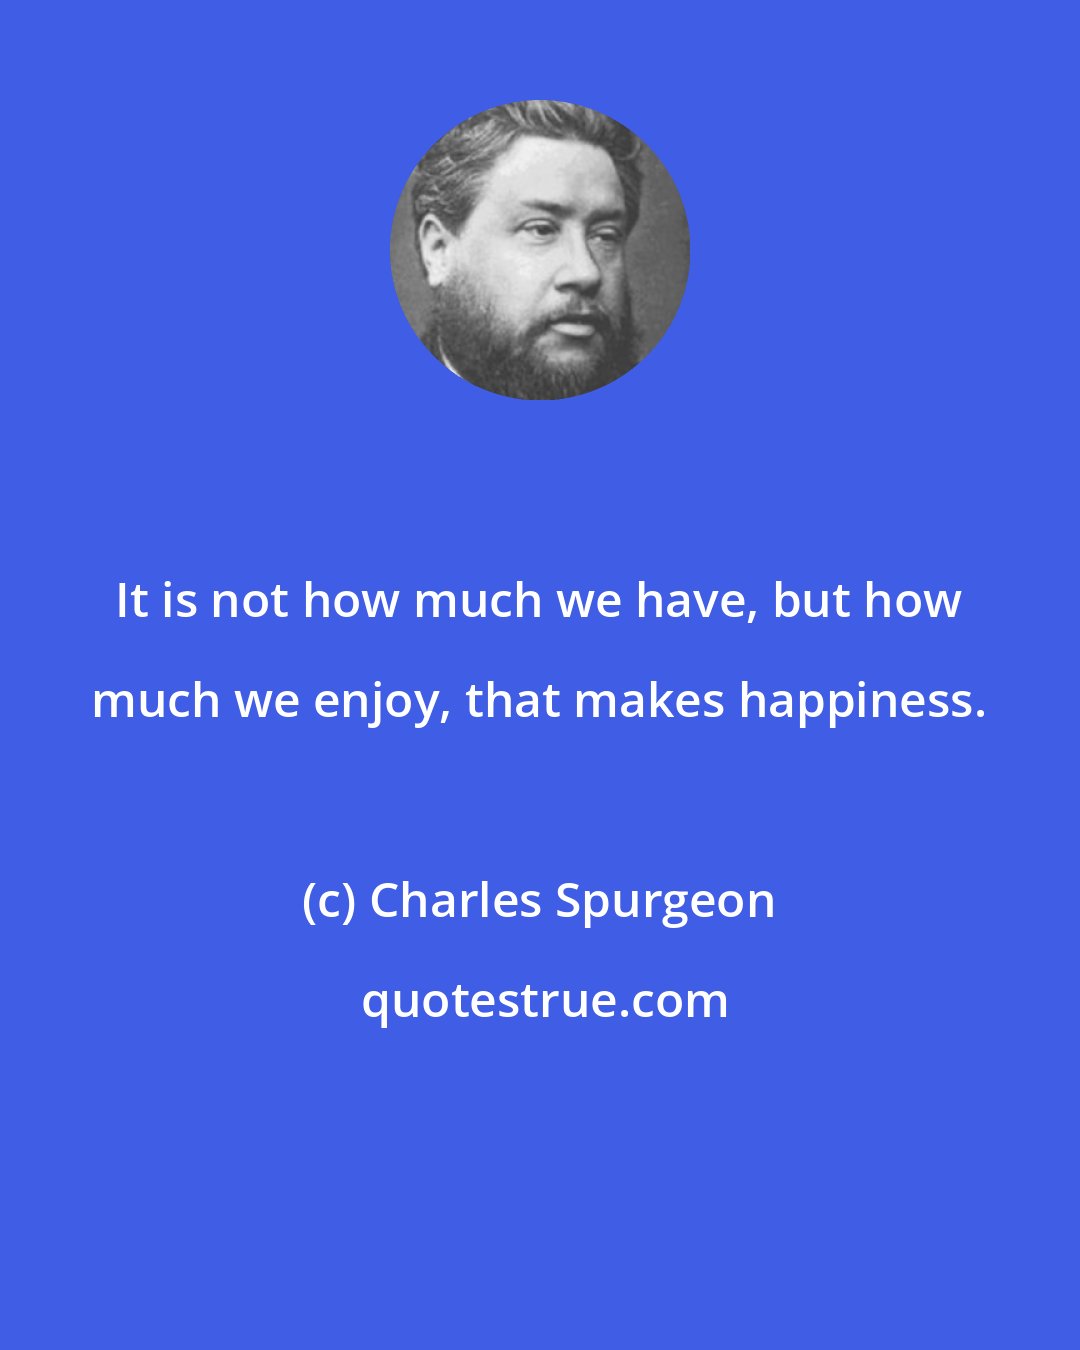 Charles Spurgeon: It is not how much we have, but how much we enjoy, that makes happiness.